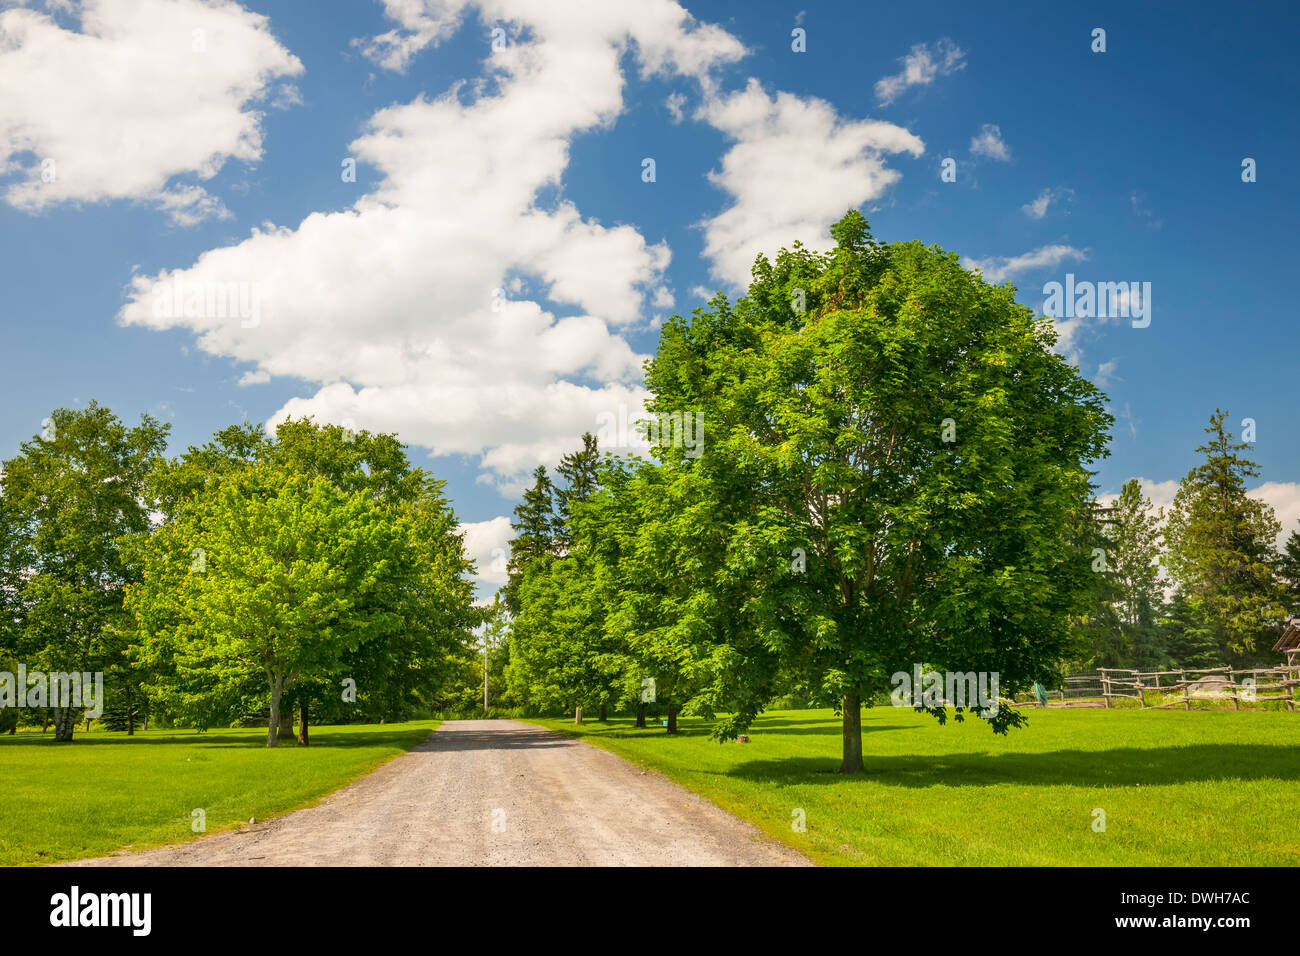 Summer landscape with rural road, lush maple trees and blue sky Stock Photo